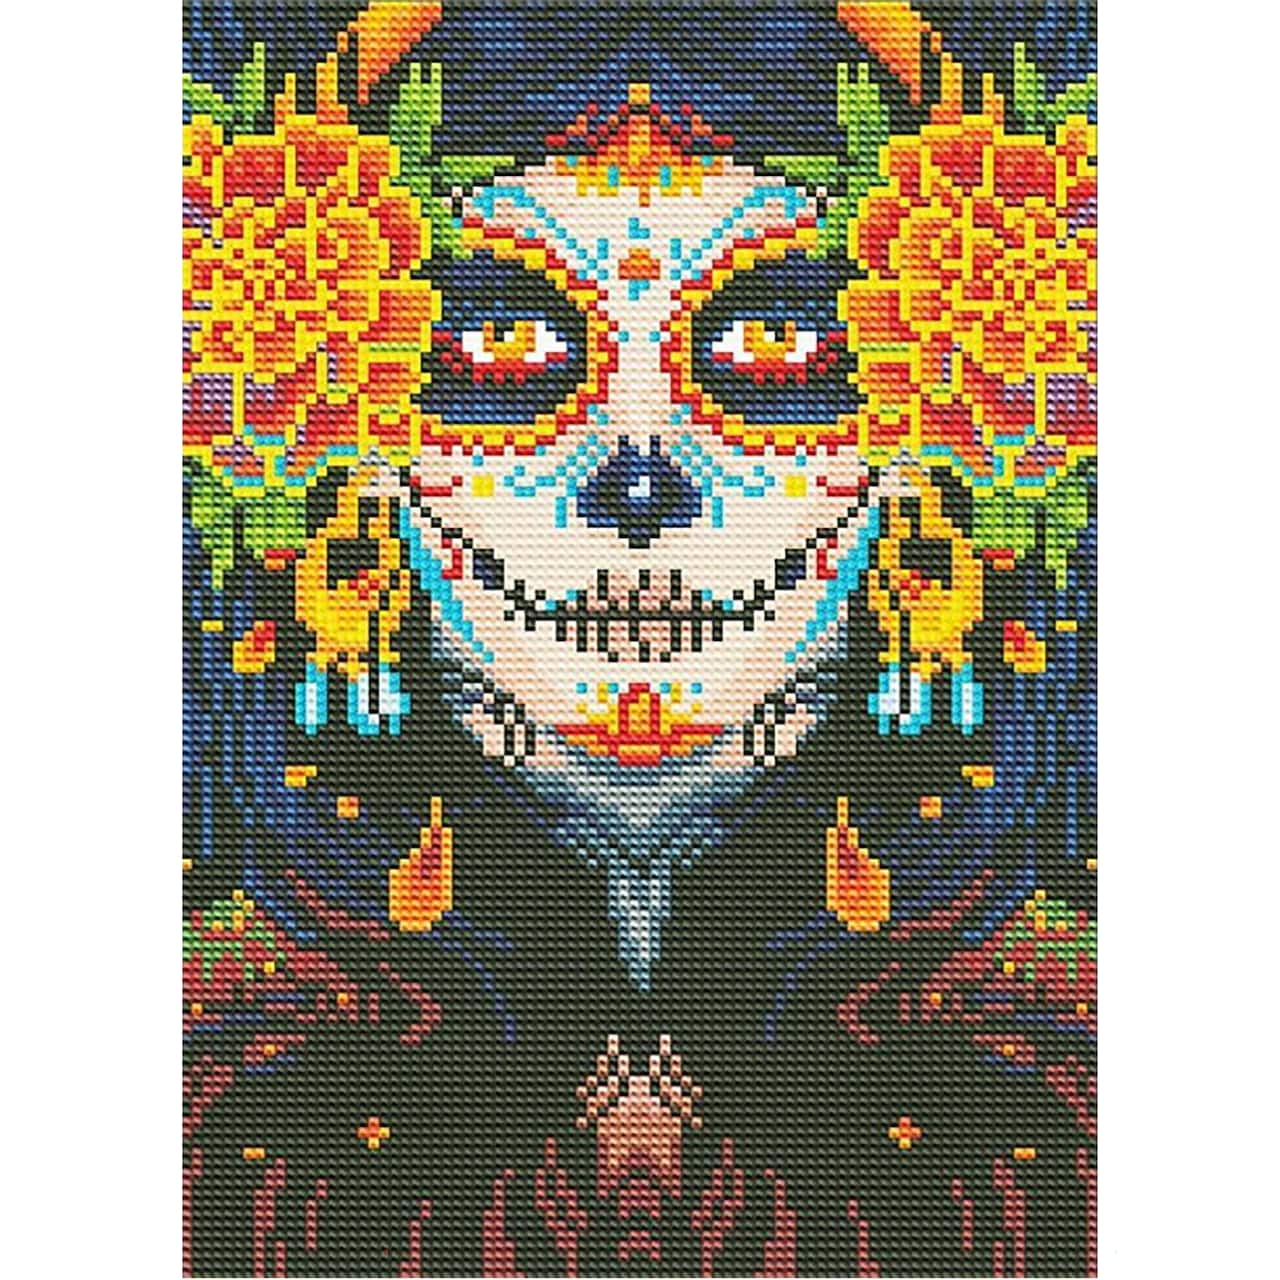 Sparkly Selections Day of the Dead Woman Glow in the Dark Diamond Art Kit